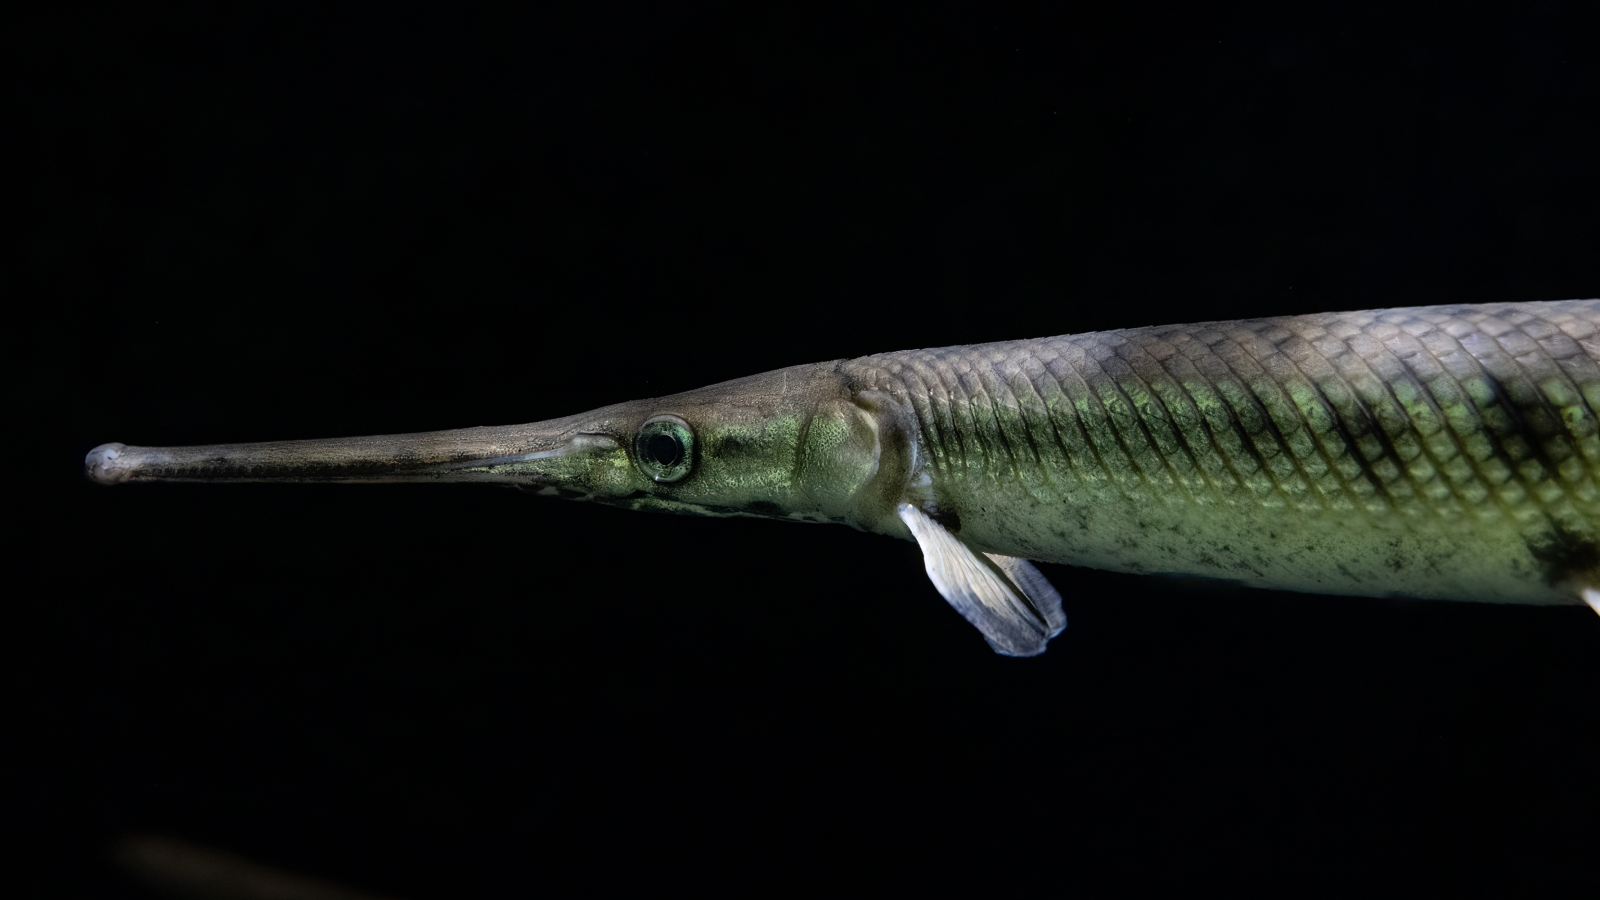 long nose gar fish swimming in a fish tank gets a close up.